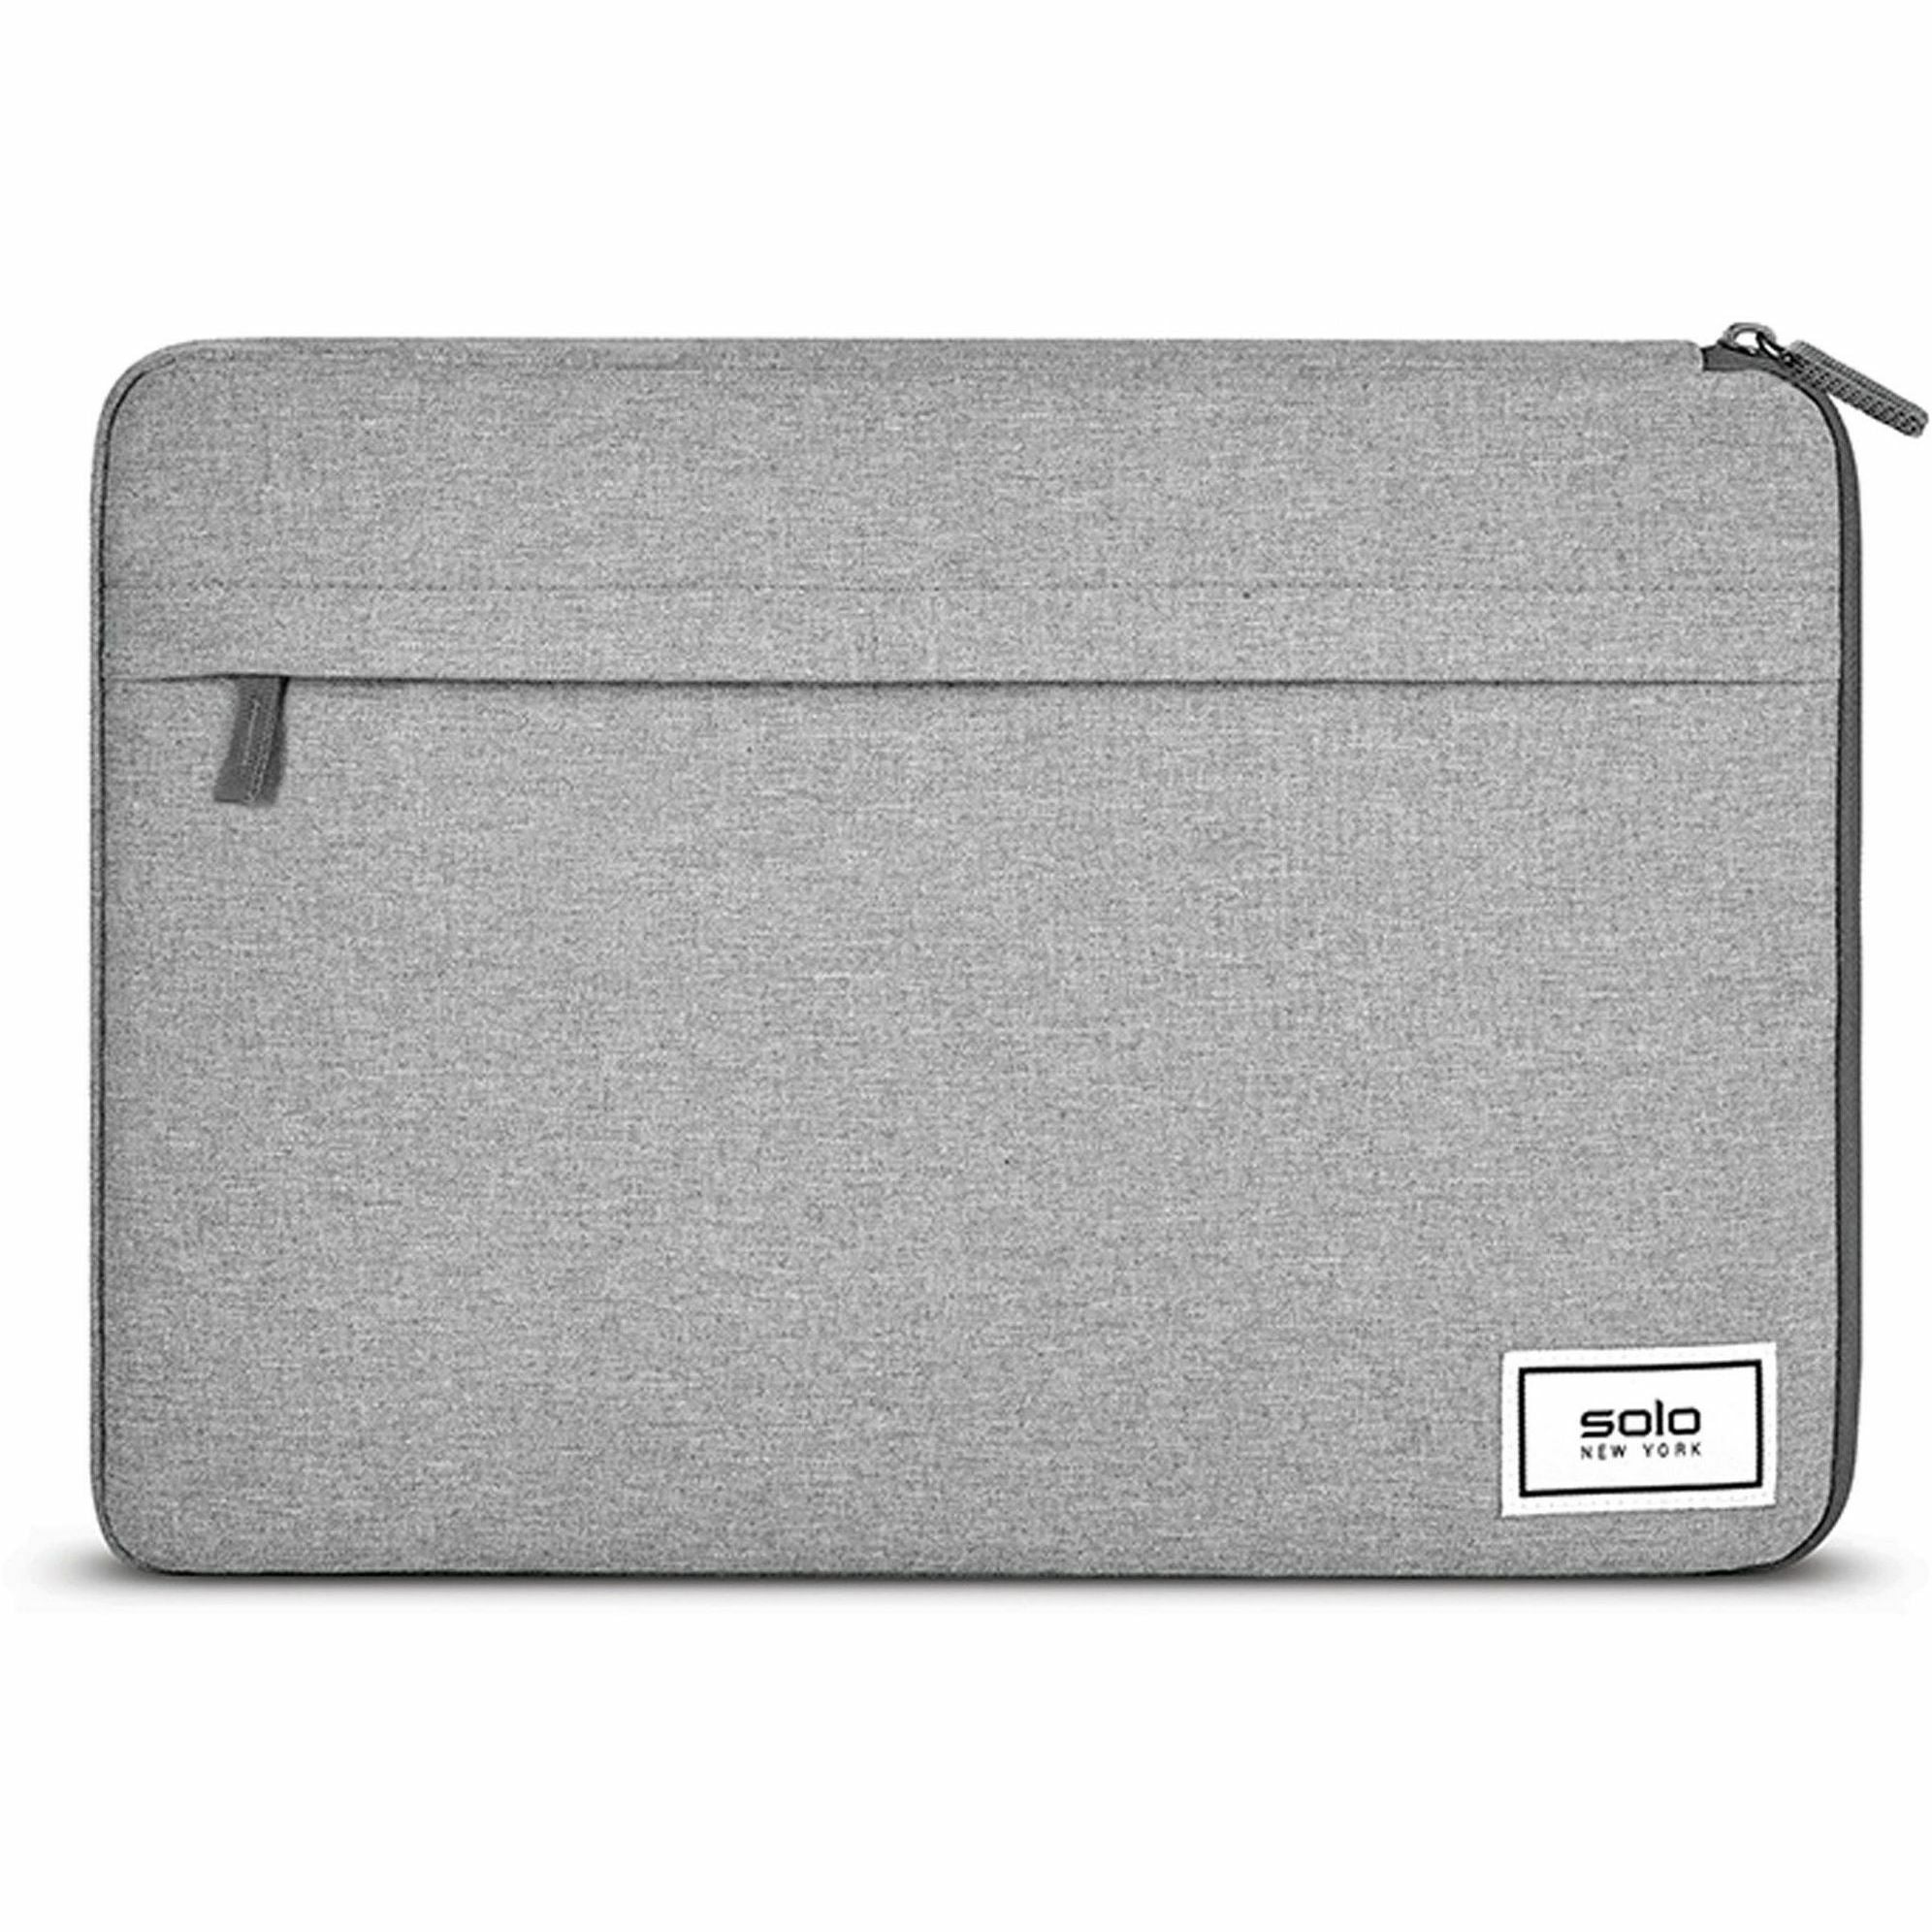 solo-focus-carrying-case-sleeve-for-156-notebook-gray-bump-resistant-damage-resistant-113-height-x-163-width-x-1-depth-1-each_uslubn10510 - 2